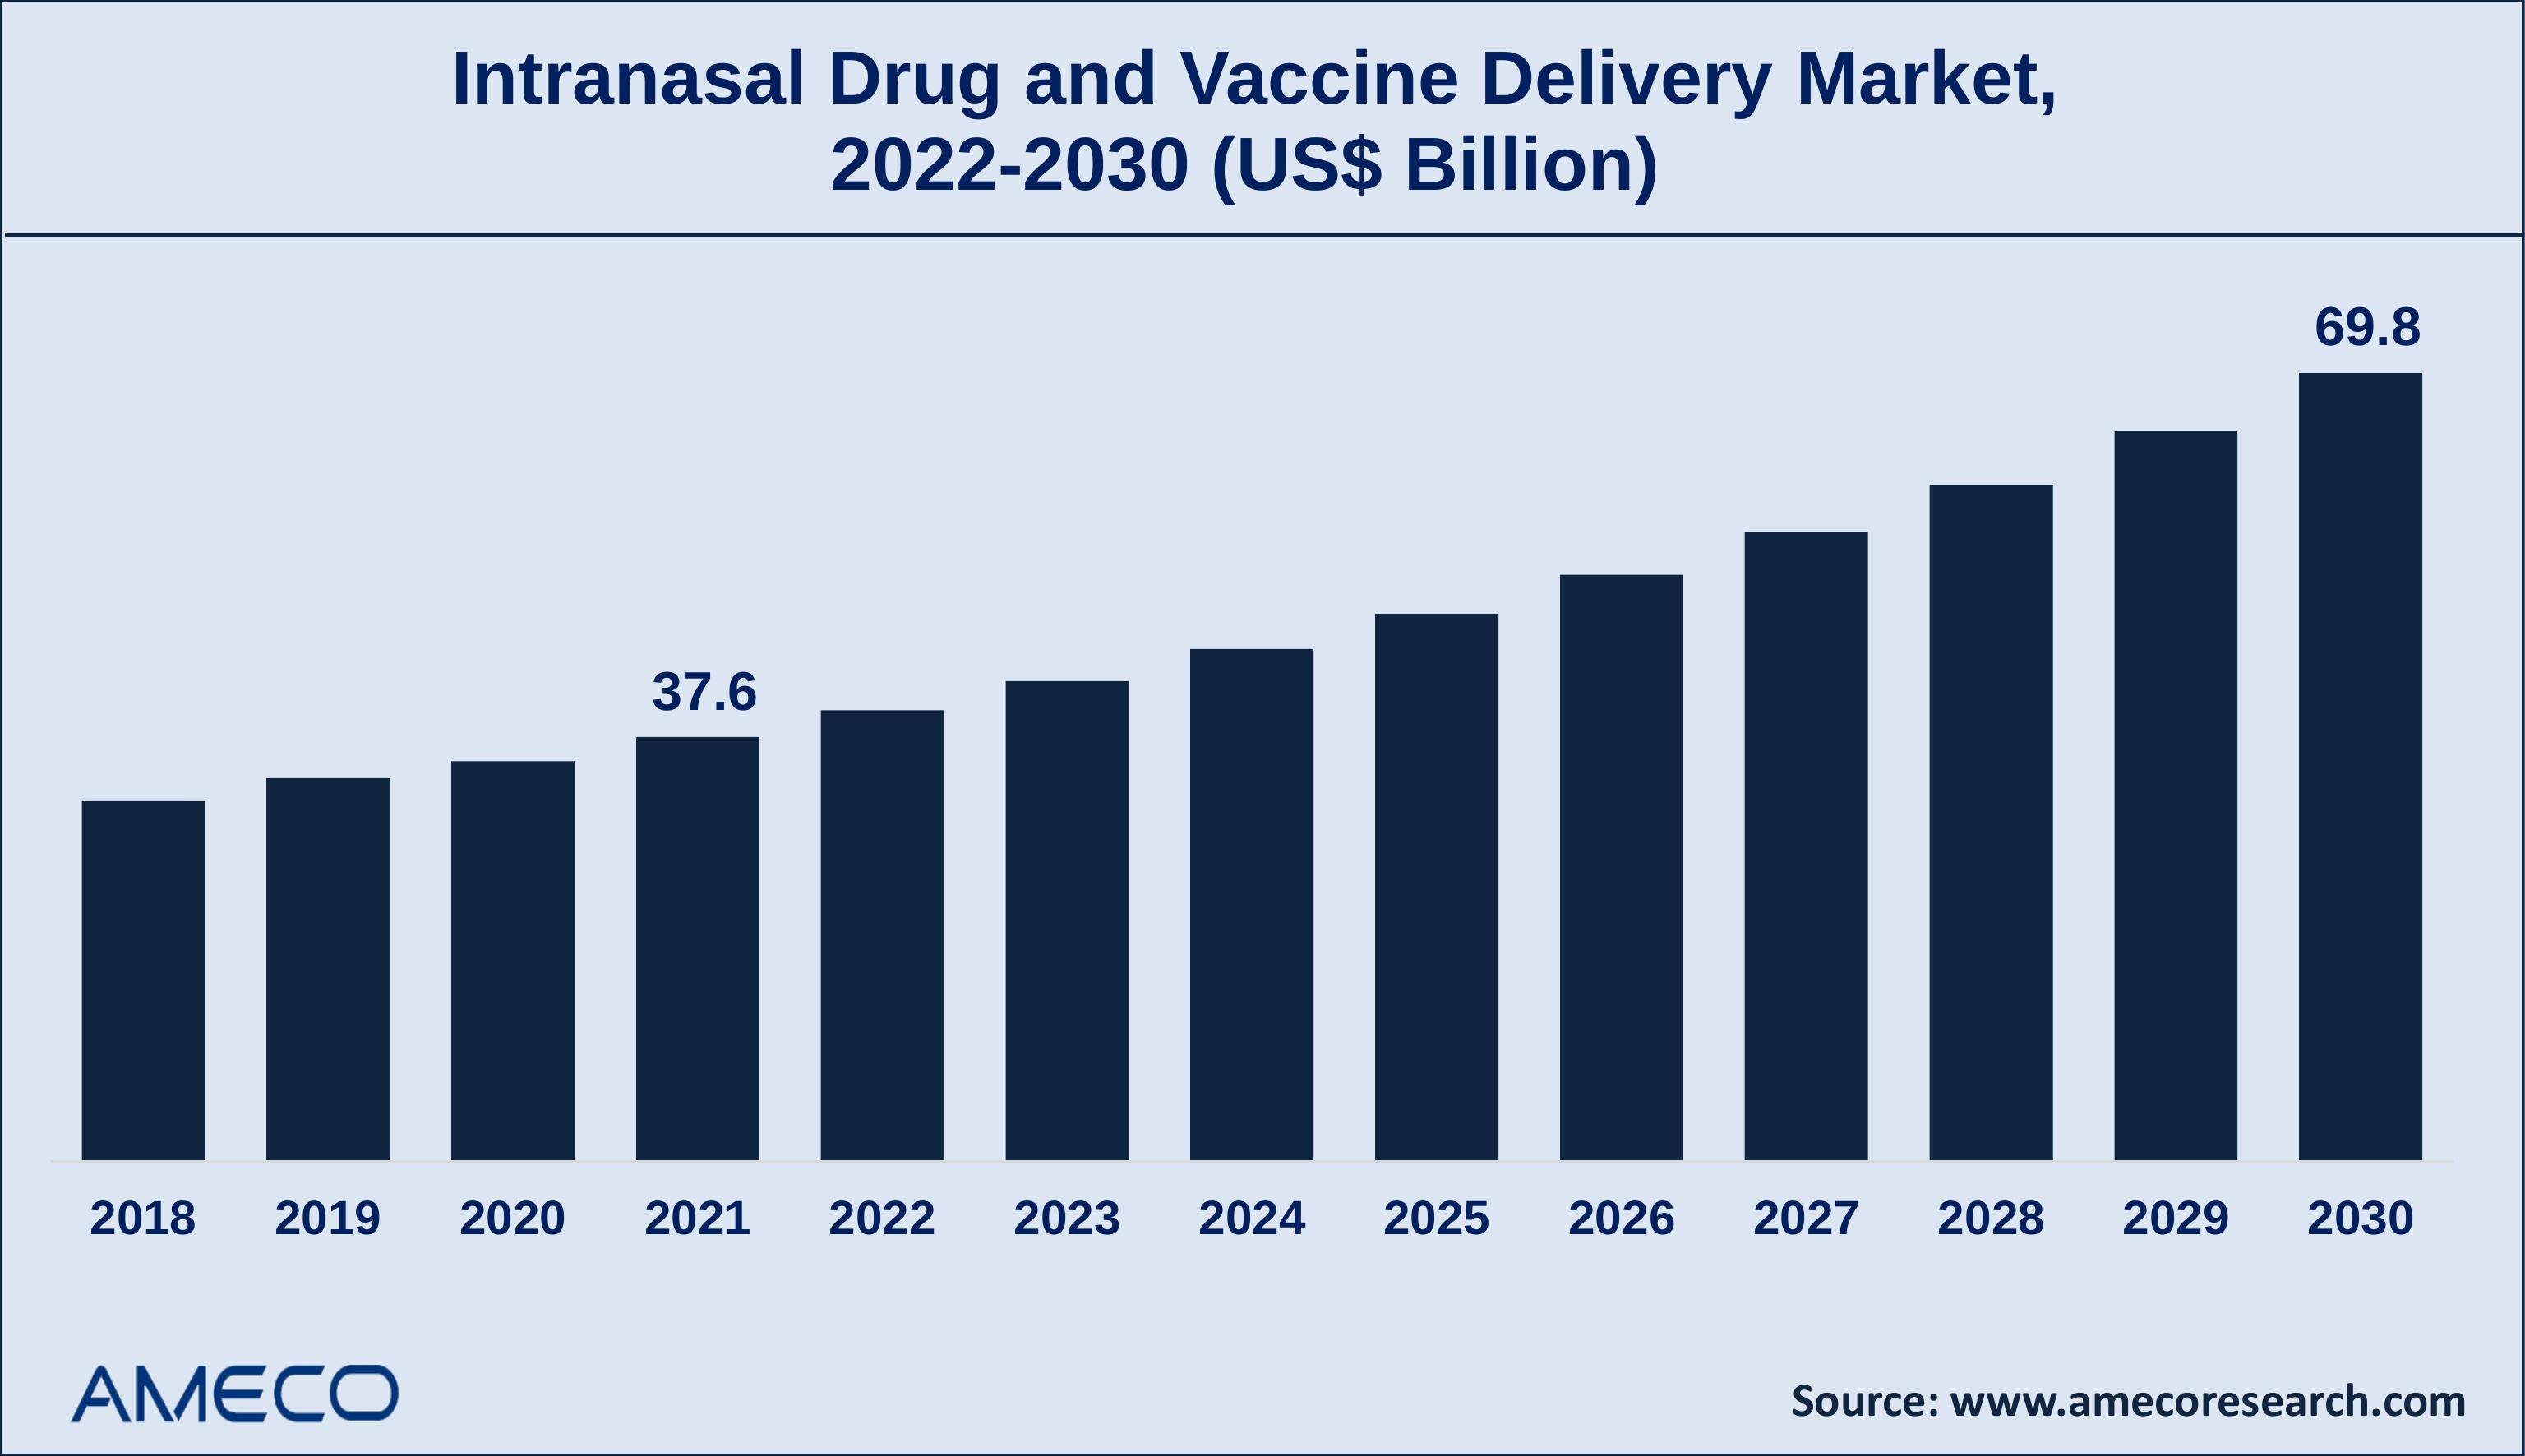 Intranasal Drug and Vaccine Delivery Market Report 2030